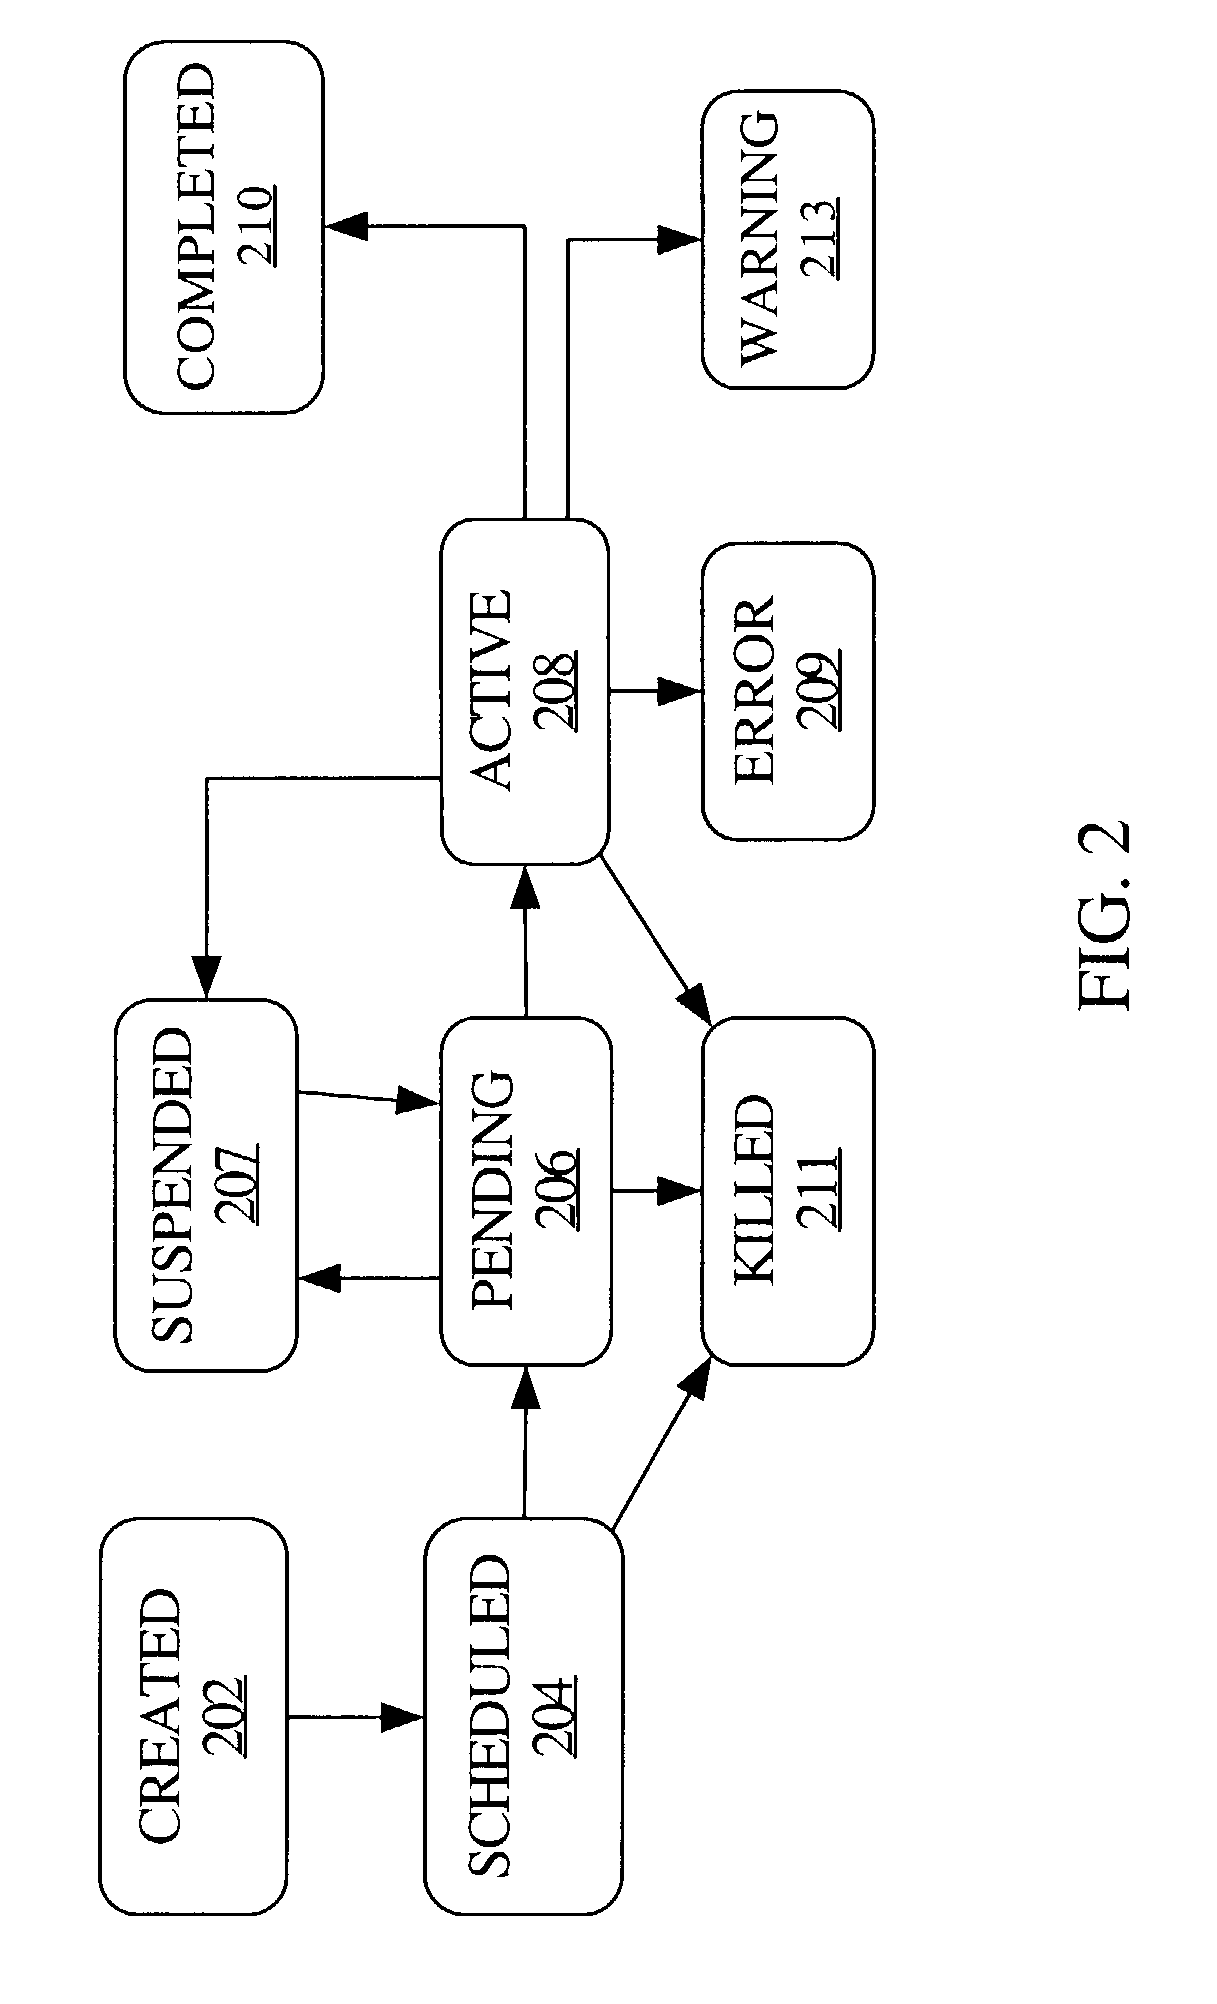 Mechanism for managing execution of interdependent aggregated processes